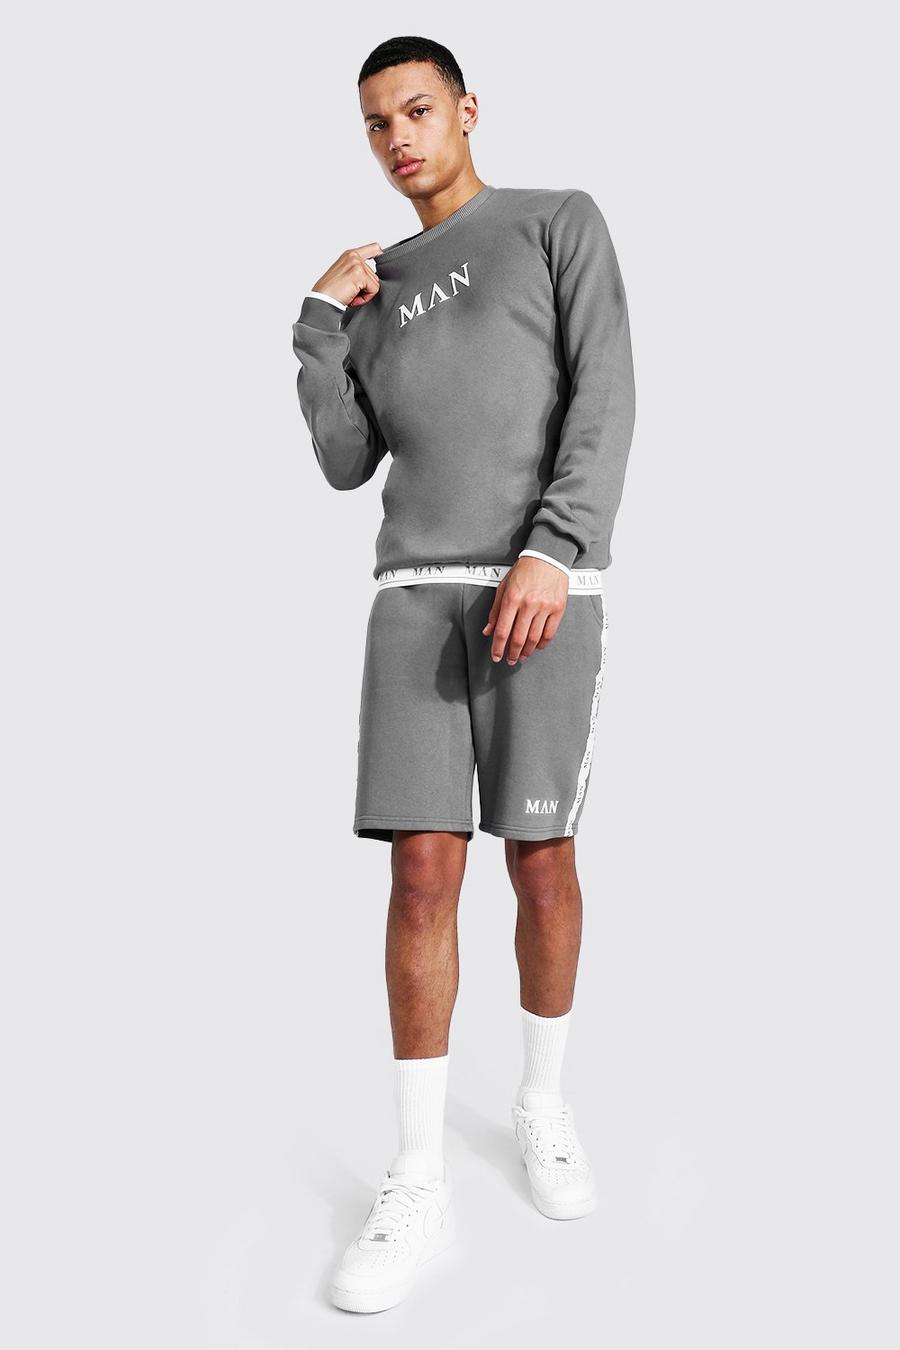 Slate Tall Man Roman Short Tracksuit With Tape image number 1